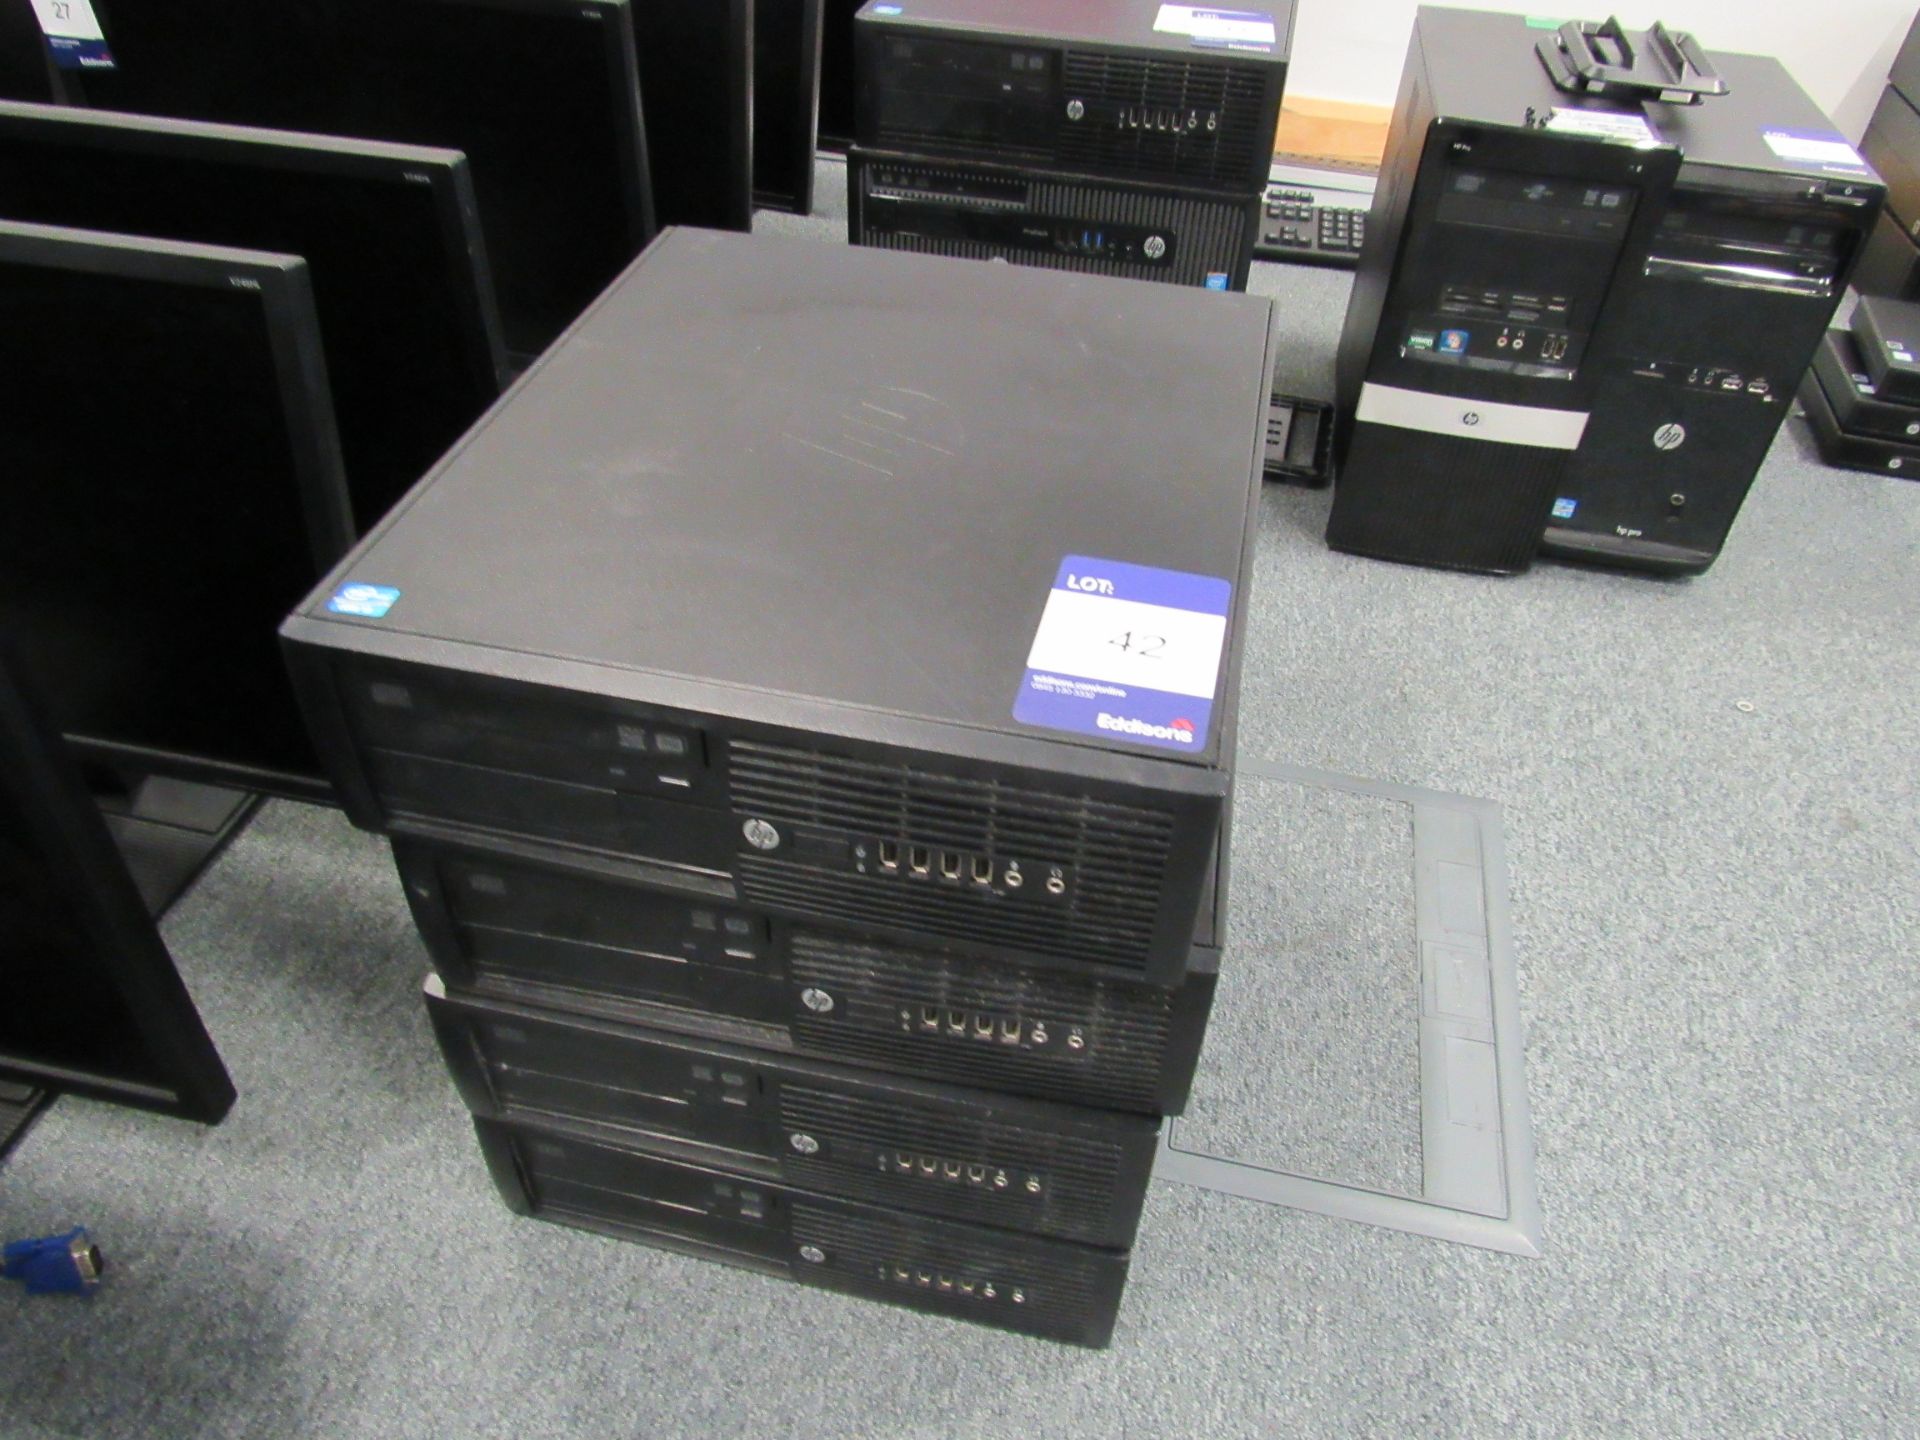 4 HP Compaq Pro 4300 Small Form Factor PC’s, No HDD’s